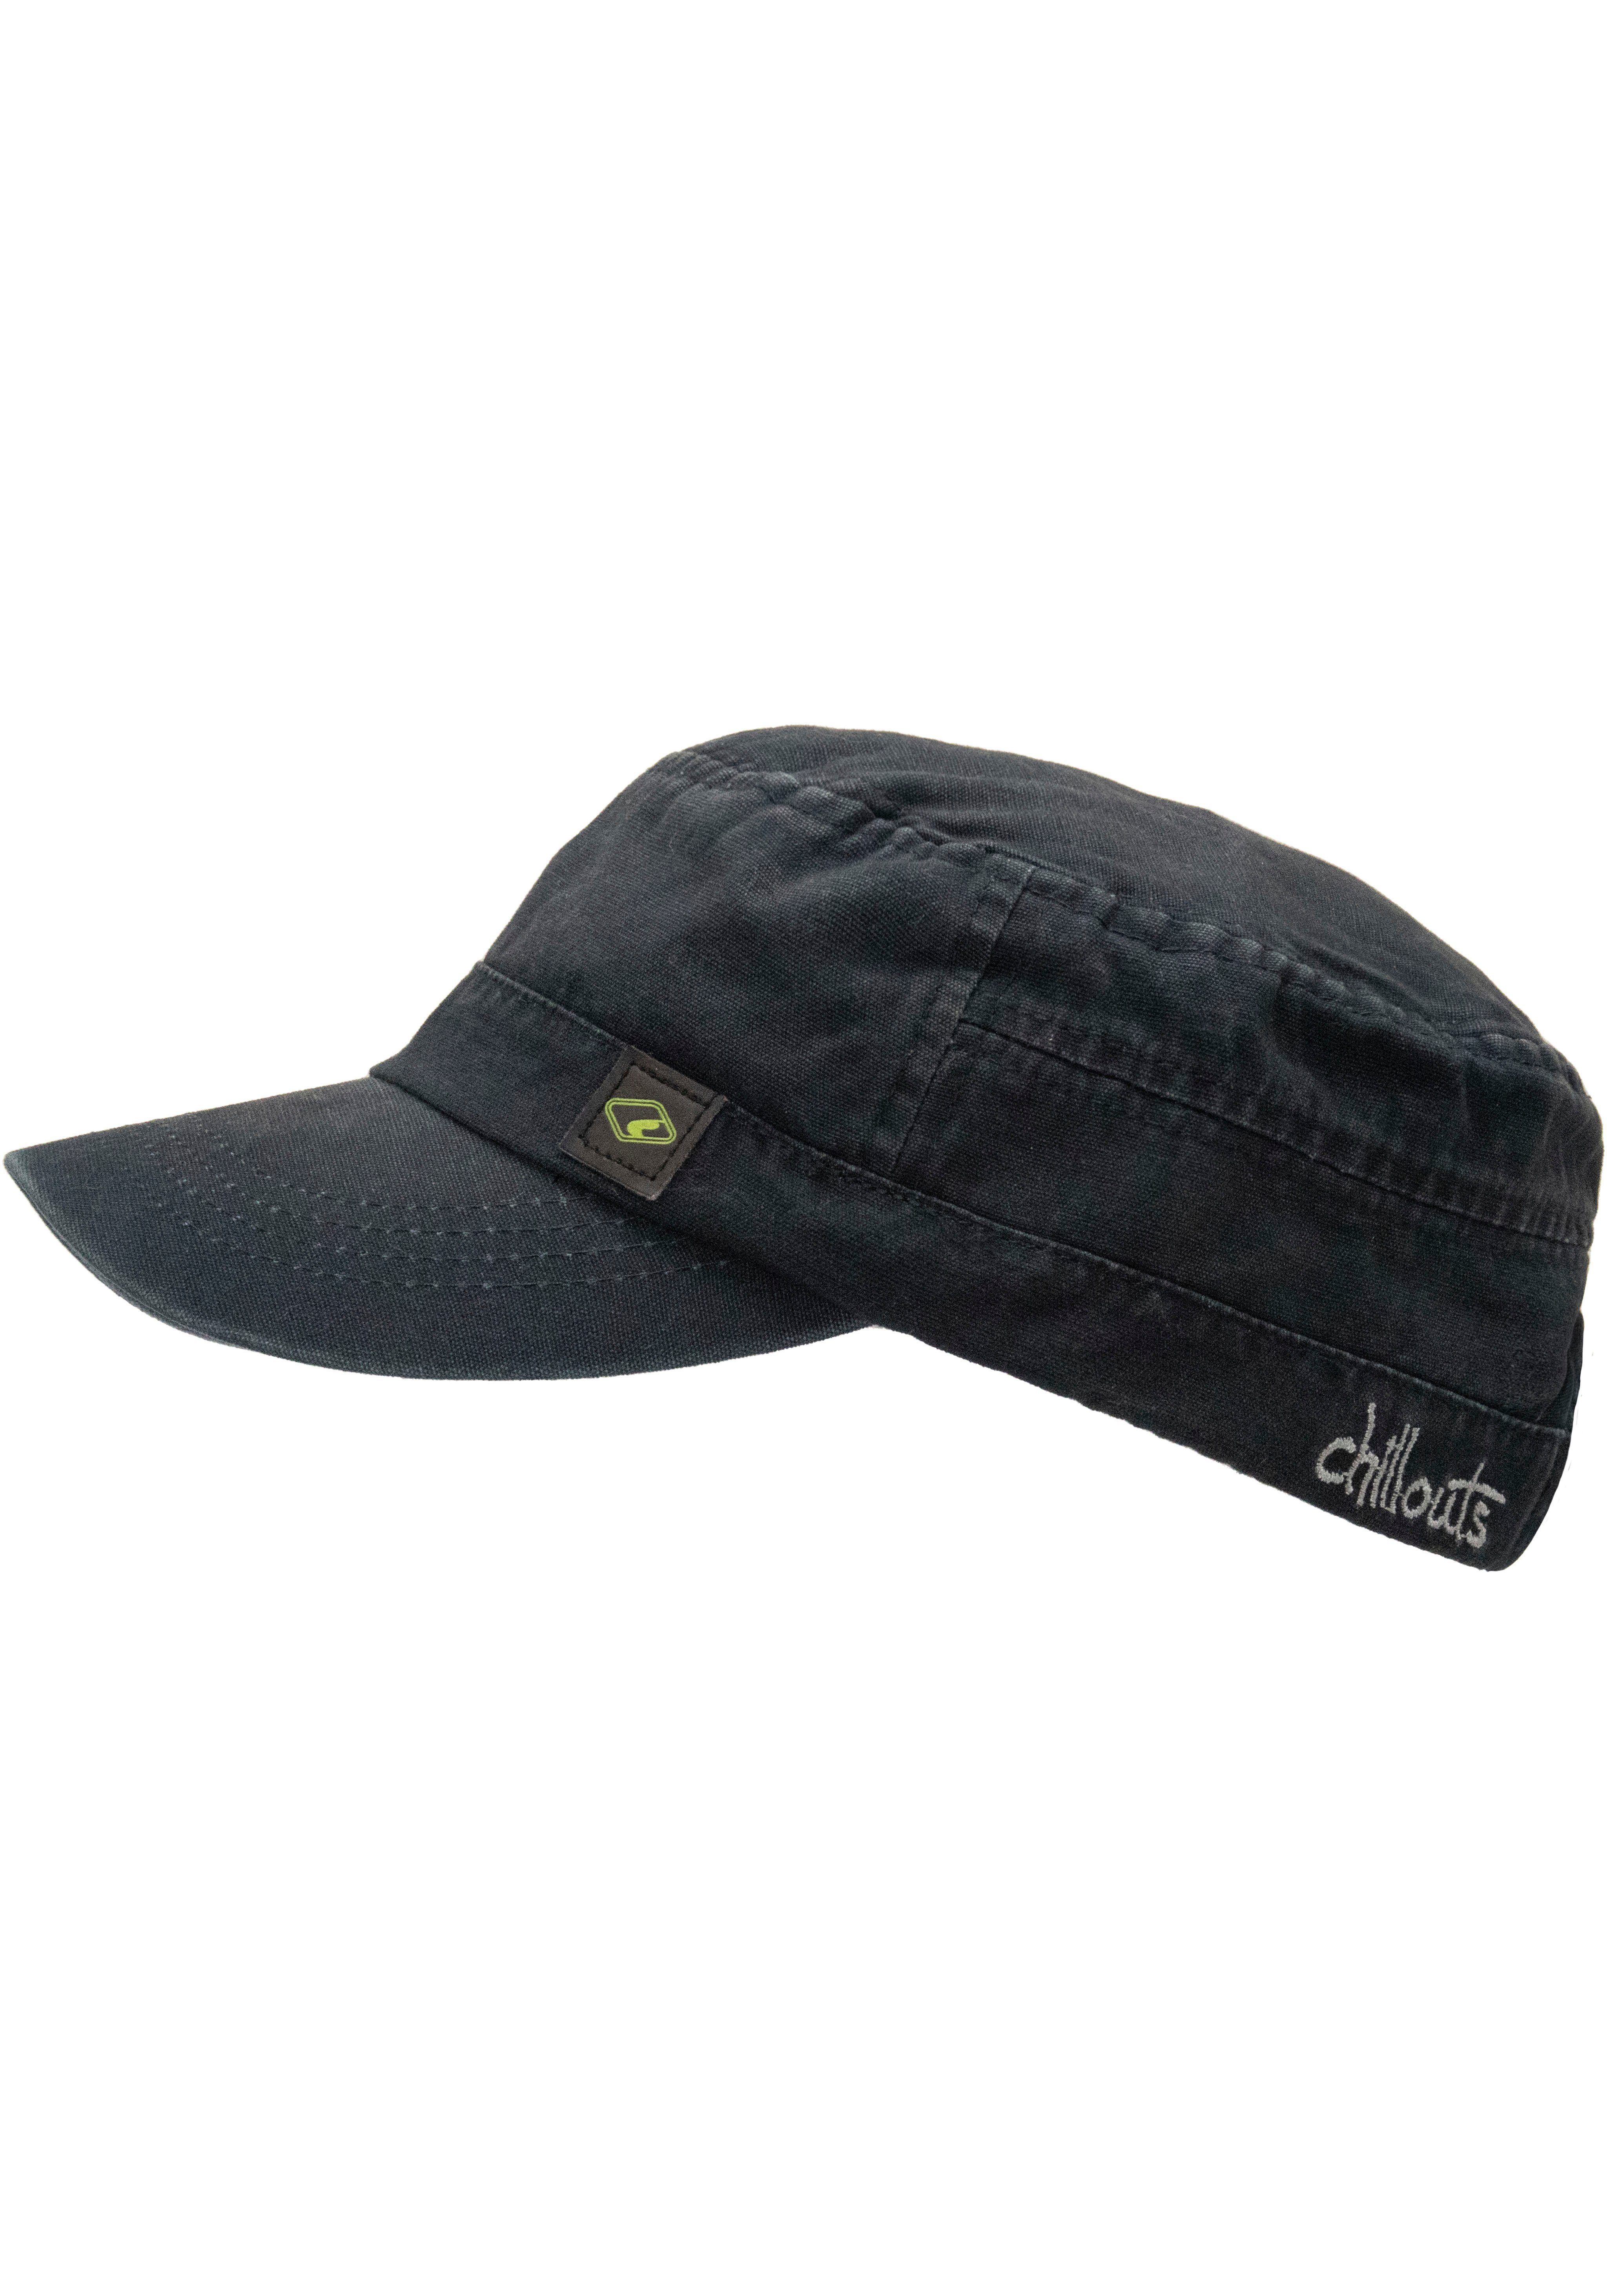 washed Size One Paso aus chillouts El Hat atmungsaktiv, Army reiner navy Cap Baumwolle,